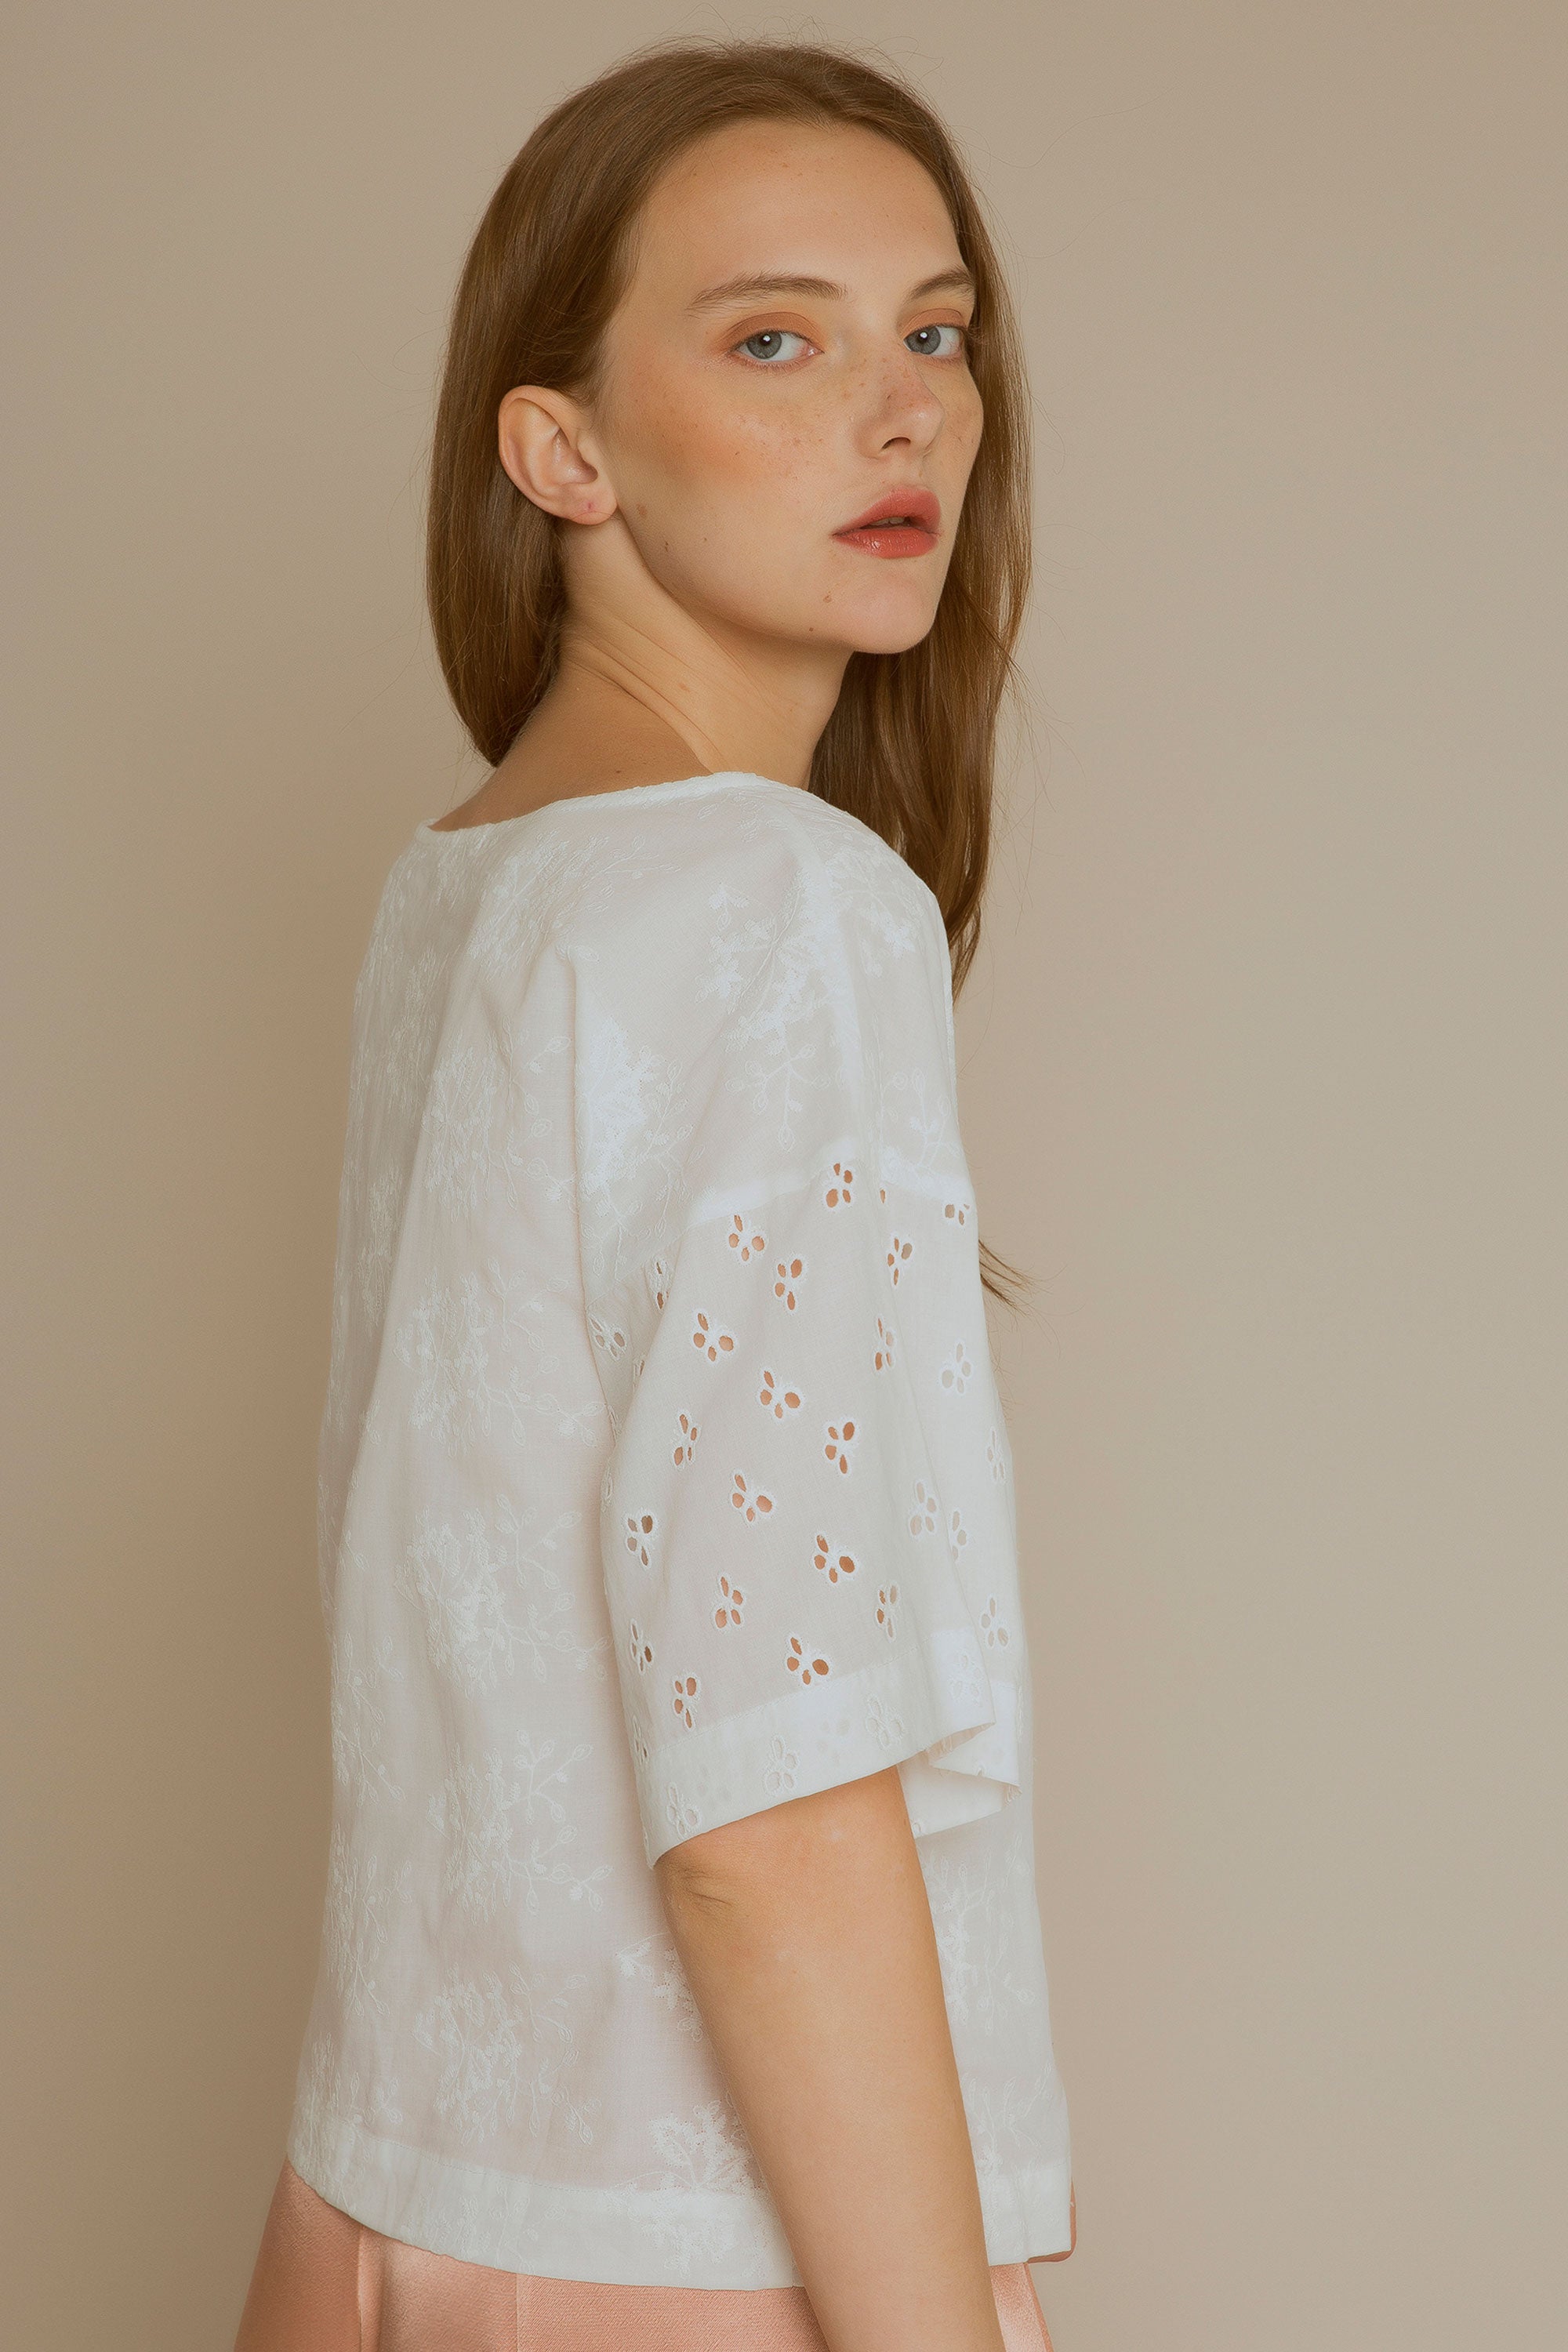 Blouse Volie embroidered white short sleeves